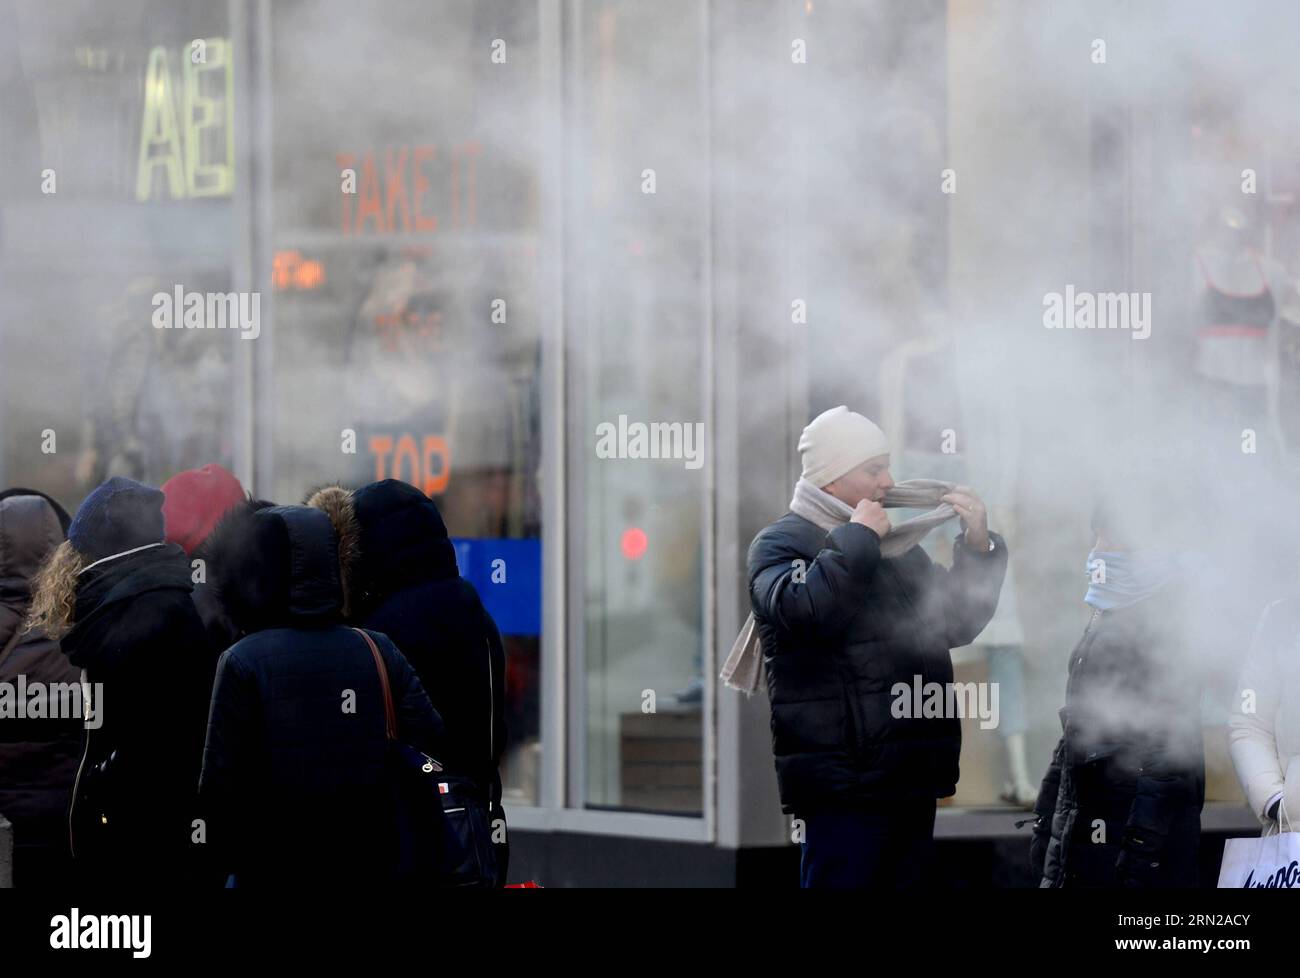 People walk in low temperatures at Times Square in New York City, the United States, on Feb. 20, 2015. New York City Emergency Management has issued a weather alert for dangerous cold temperatures for Feb. 20, followed by a wintry mix of snow, sleet and freezing rain. A bitterly cold chill known as the Siberian Express has enveloped much of eastern America, sending temperatures plummeting below their normal February levels to record lows in at least 100 places. ) US-NEW YORK-WEATHER-COLD WAVE WangxLei PUBLICATIONxNOTxINxCHN   Celebrities Walk in Low temperatures AT Times Square in New York Cit Stock Photo